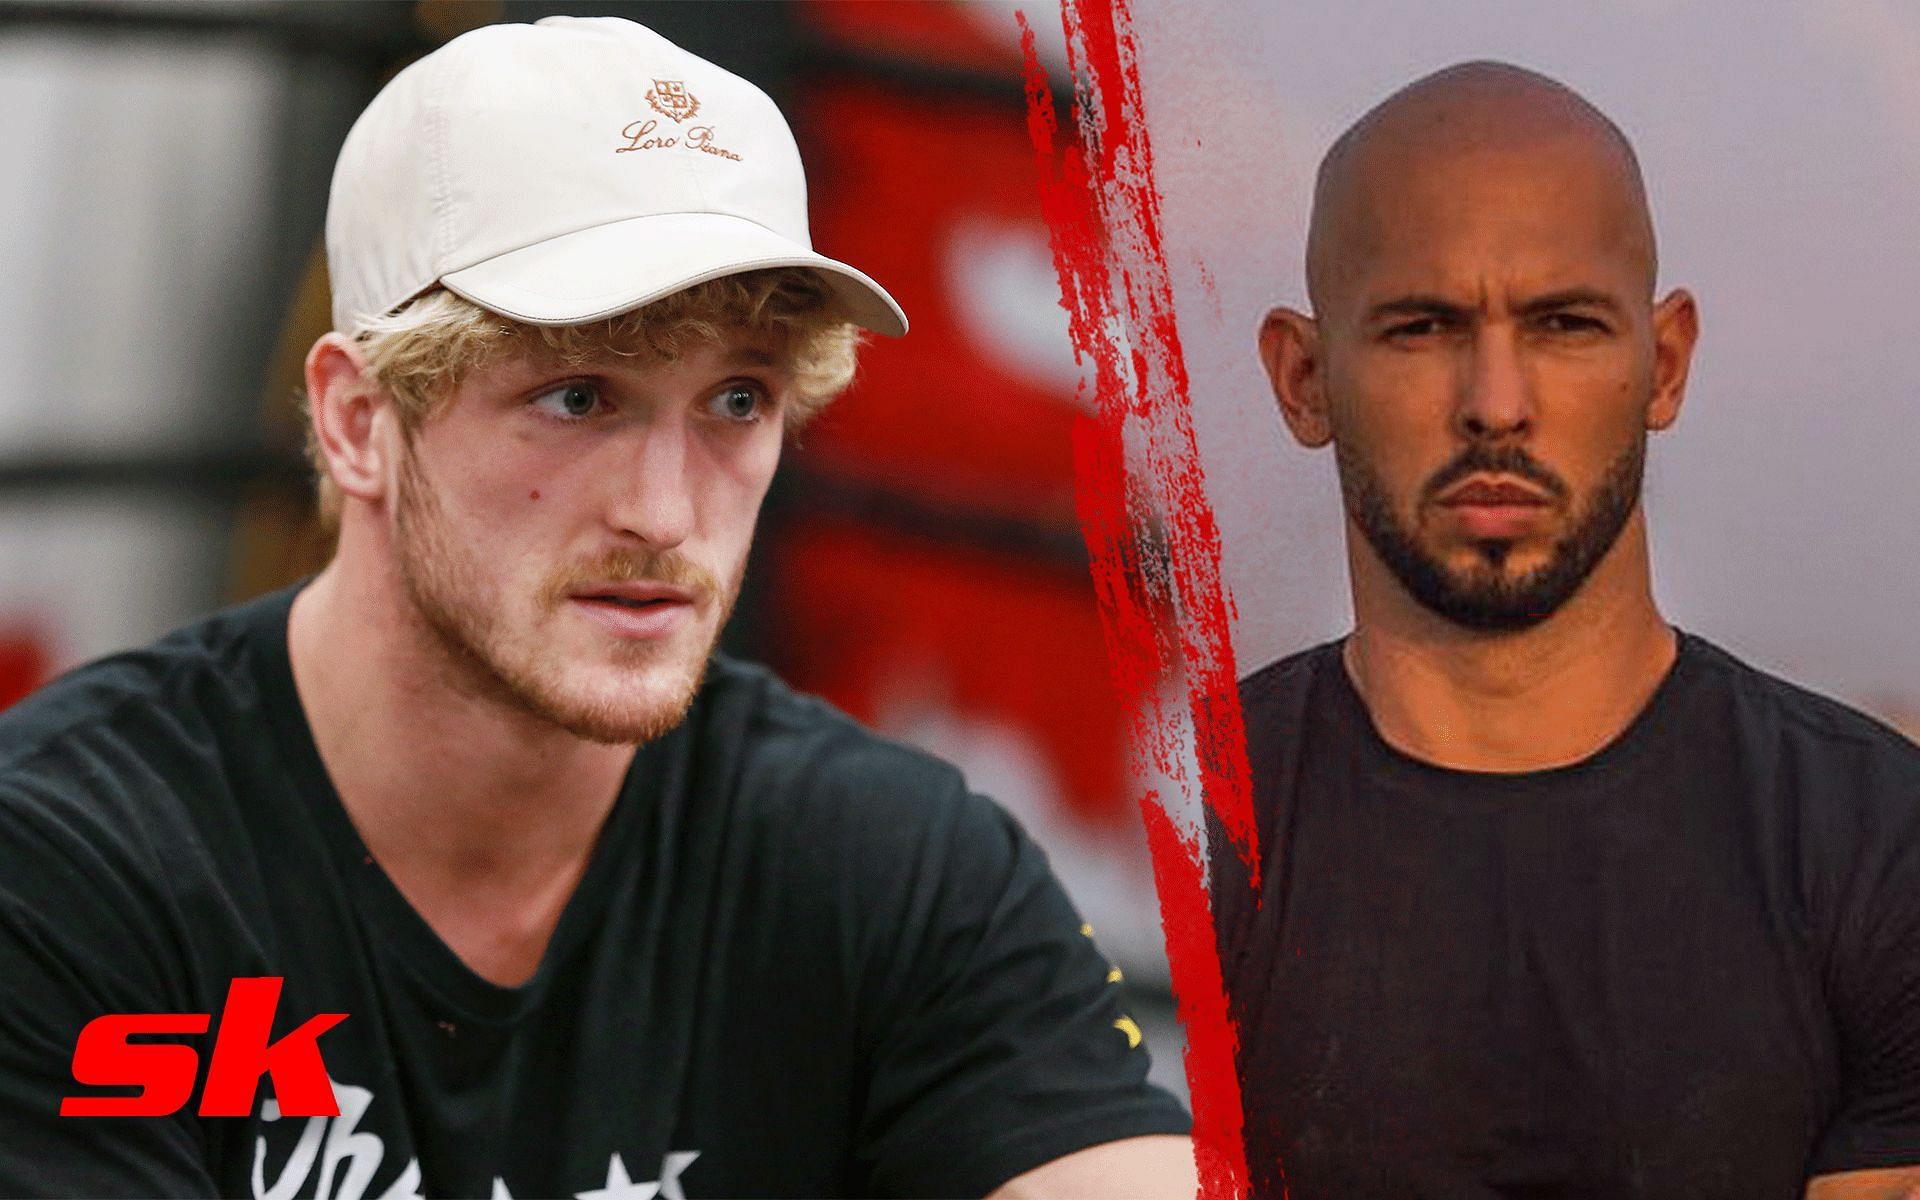 Logan Paul (Left), Andrew Tate (Right) [Image courtesy: Getty and @Cobretate on Twitter]